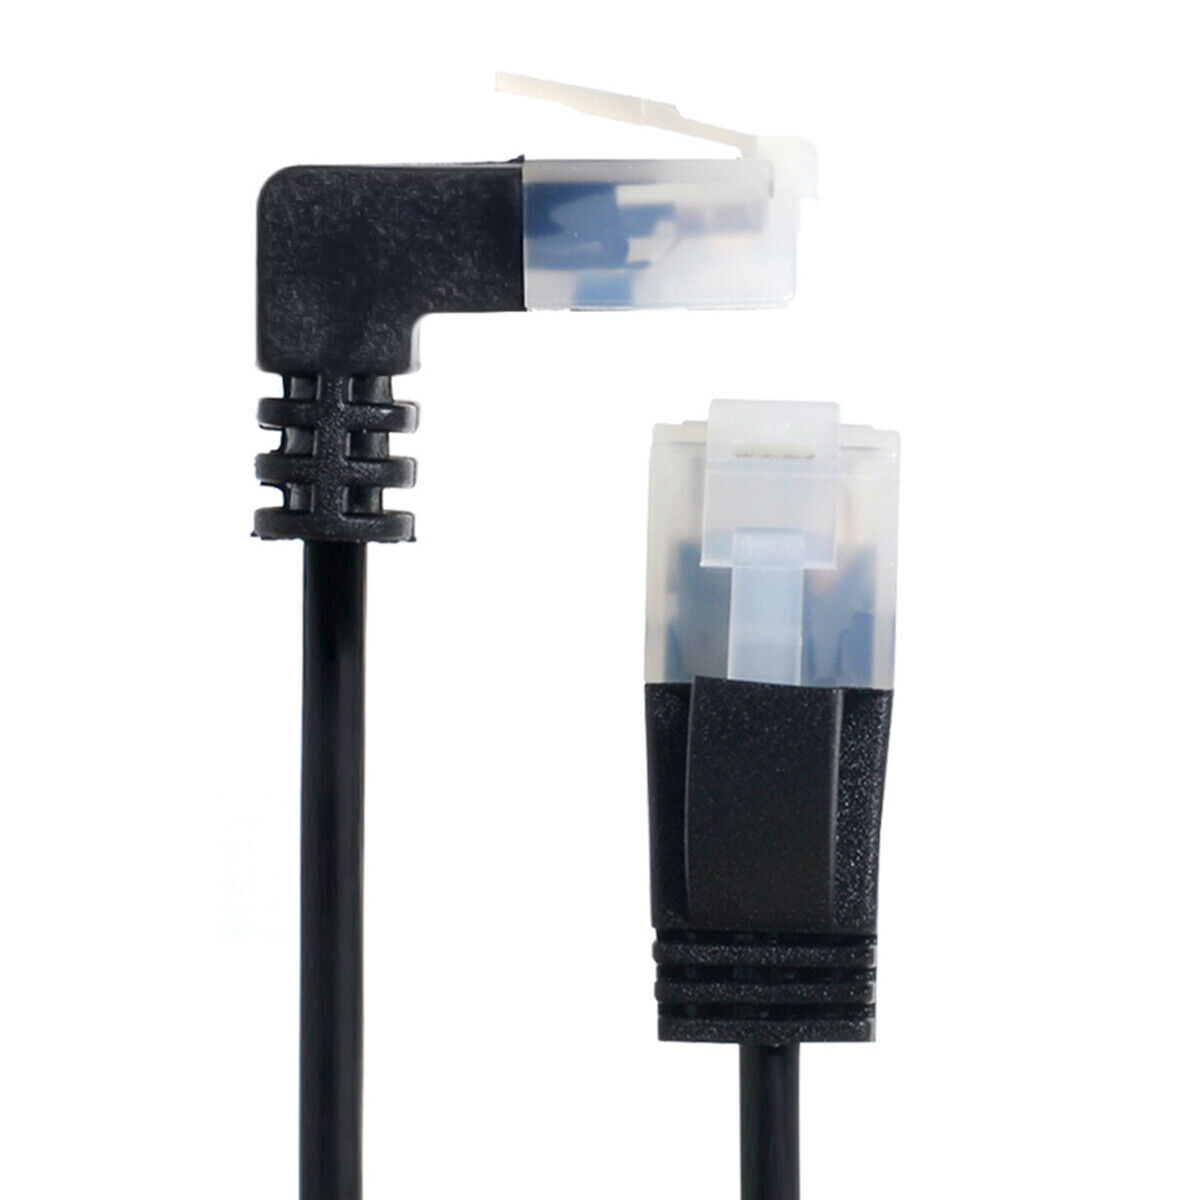 Cablecc Cat6 RJ45 Up Angled to UTP Network Cable Patch Cord Cat6a Lan for Router